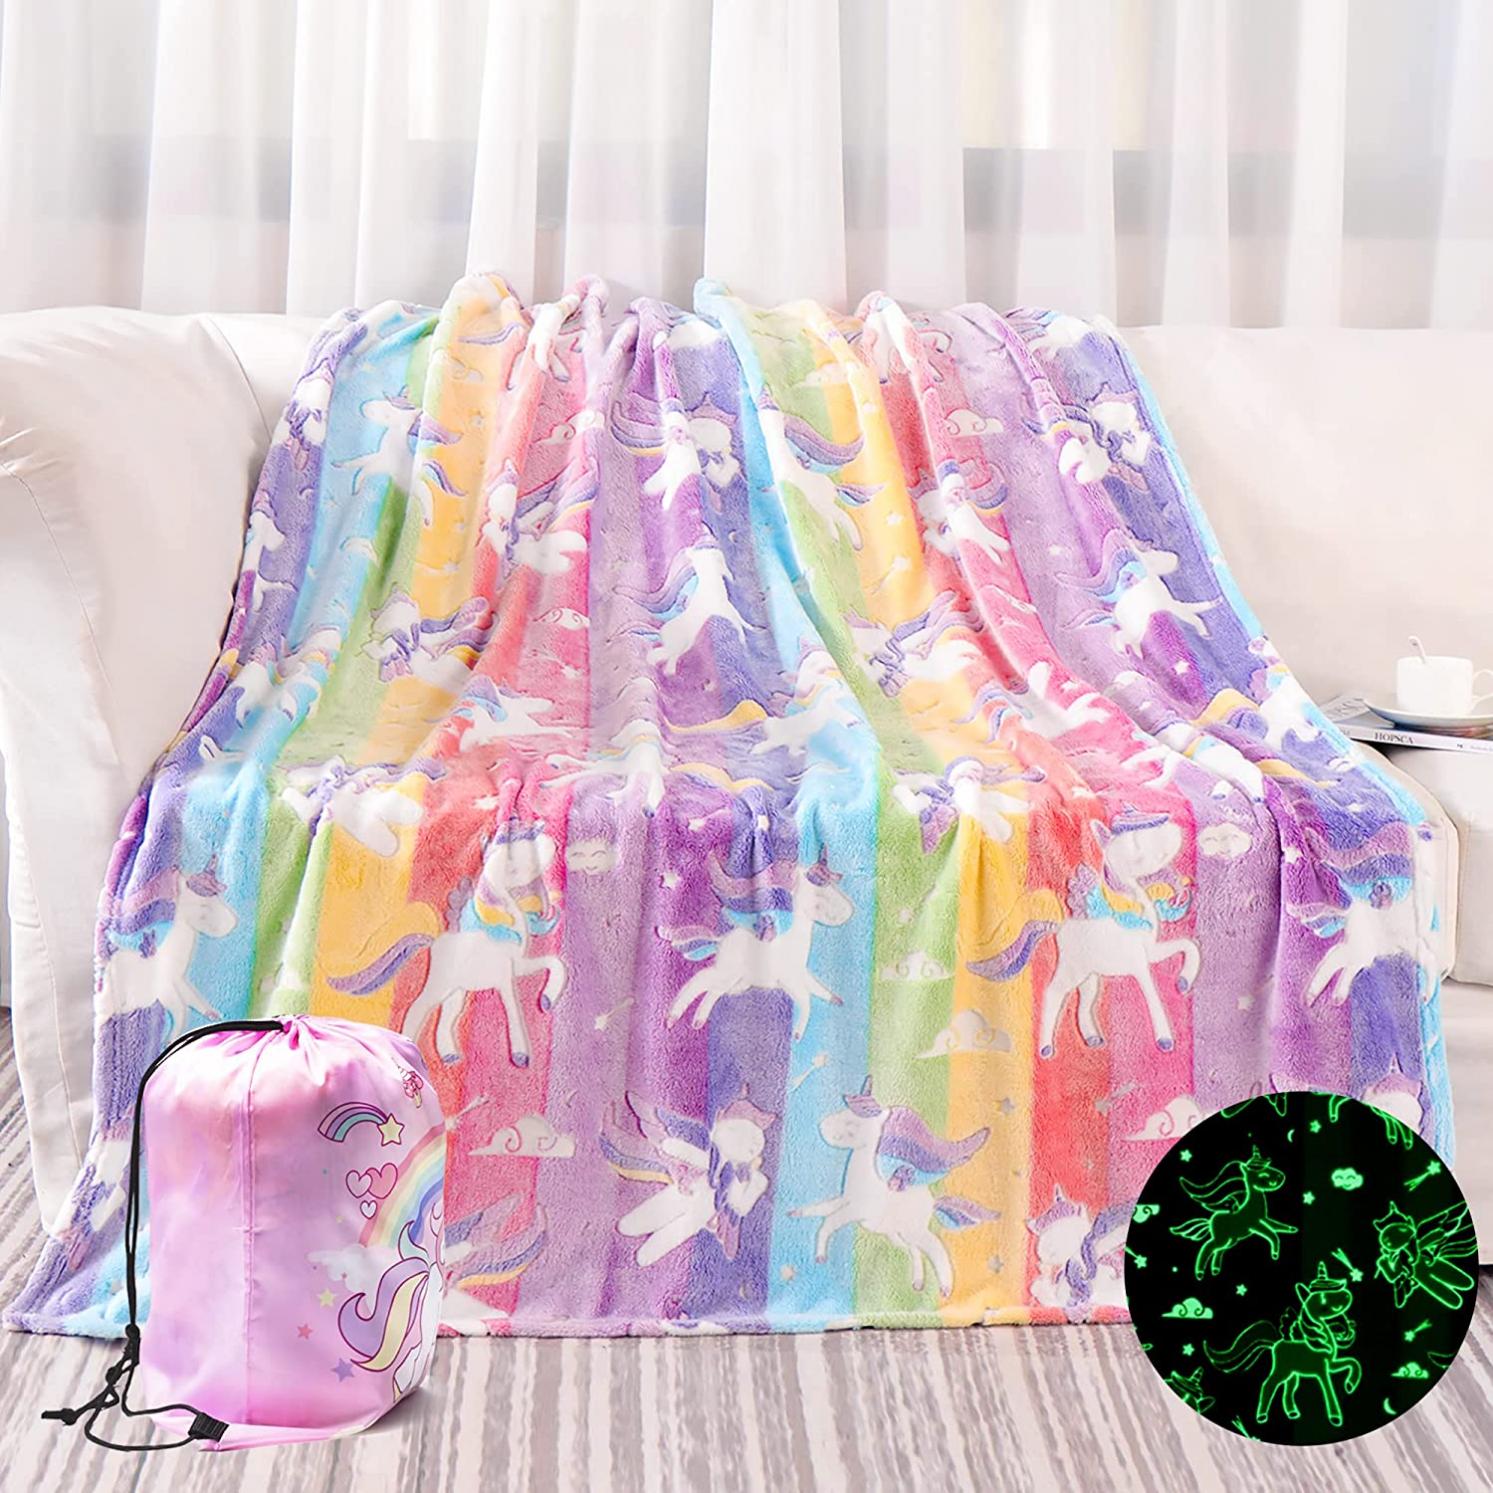 Glow in The Dark Blanket Unicorn Gifts for Girls, Soft Blanket 3 4 5 6 7 8 9 10 Year Old Girl Gifts Ideas, Toddler Girls Toys Age 6-8, Gifts for Girls for Birthday Christmas Halloween Thanksgiving